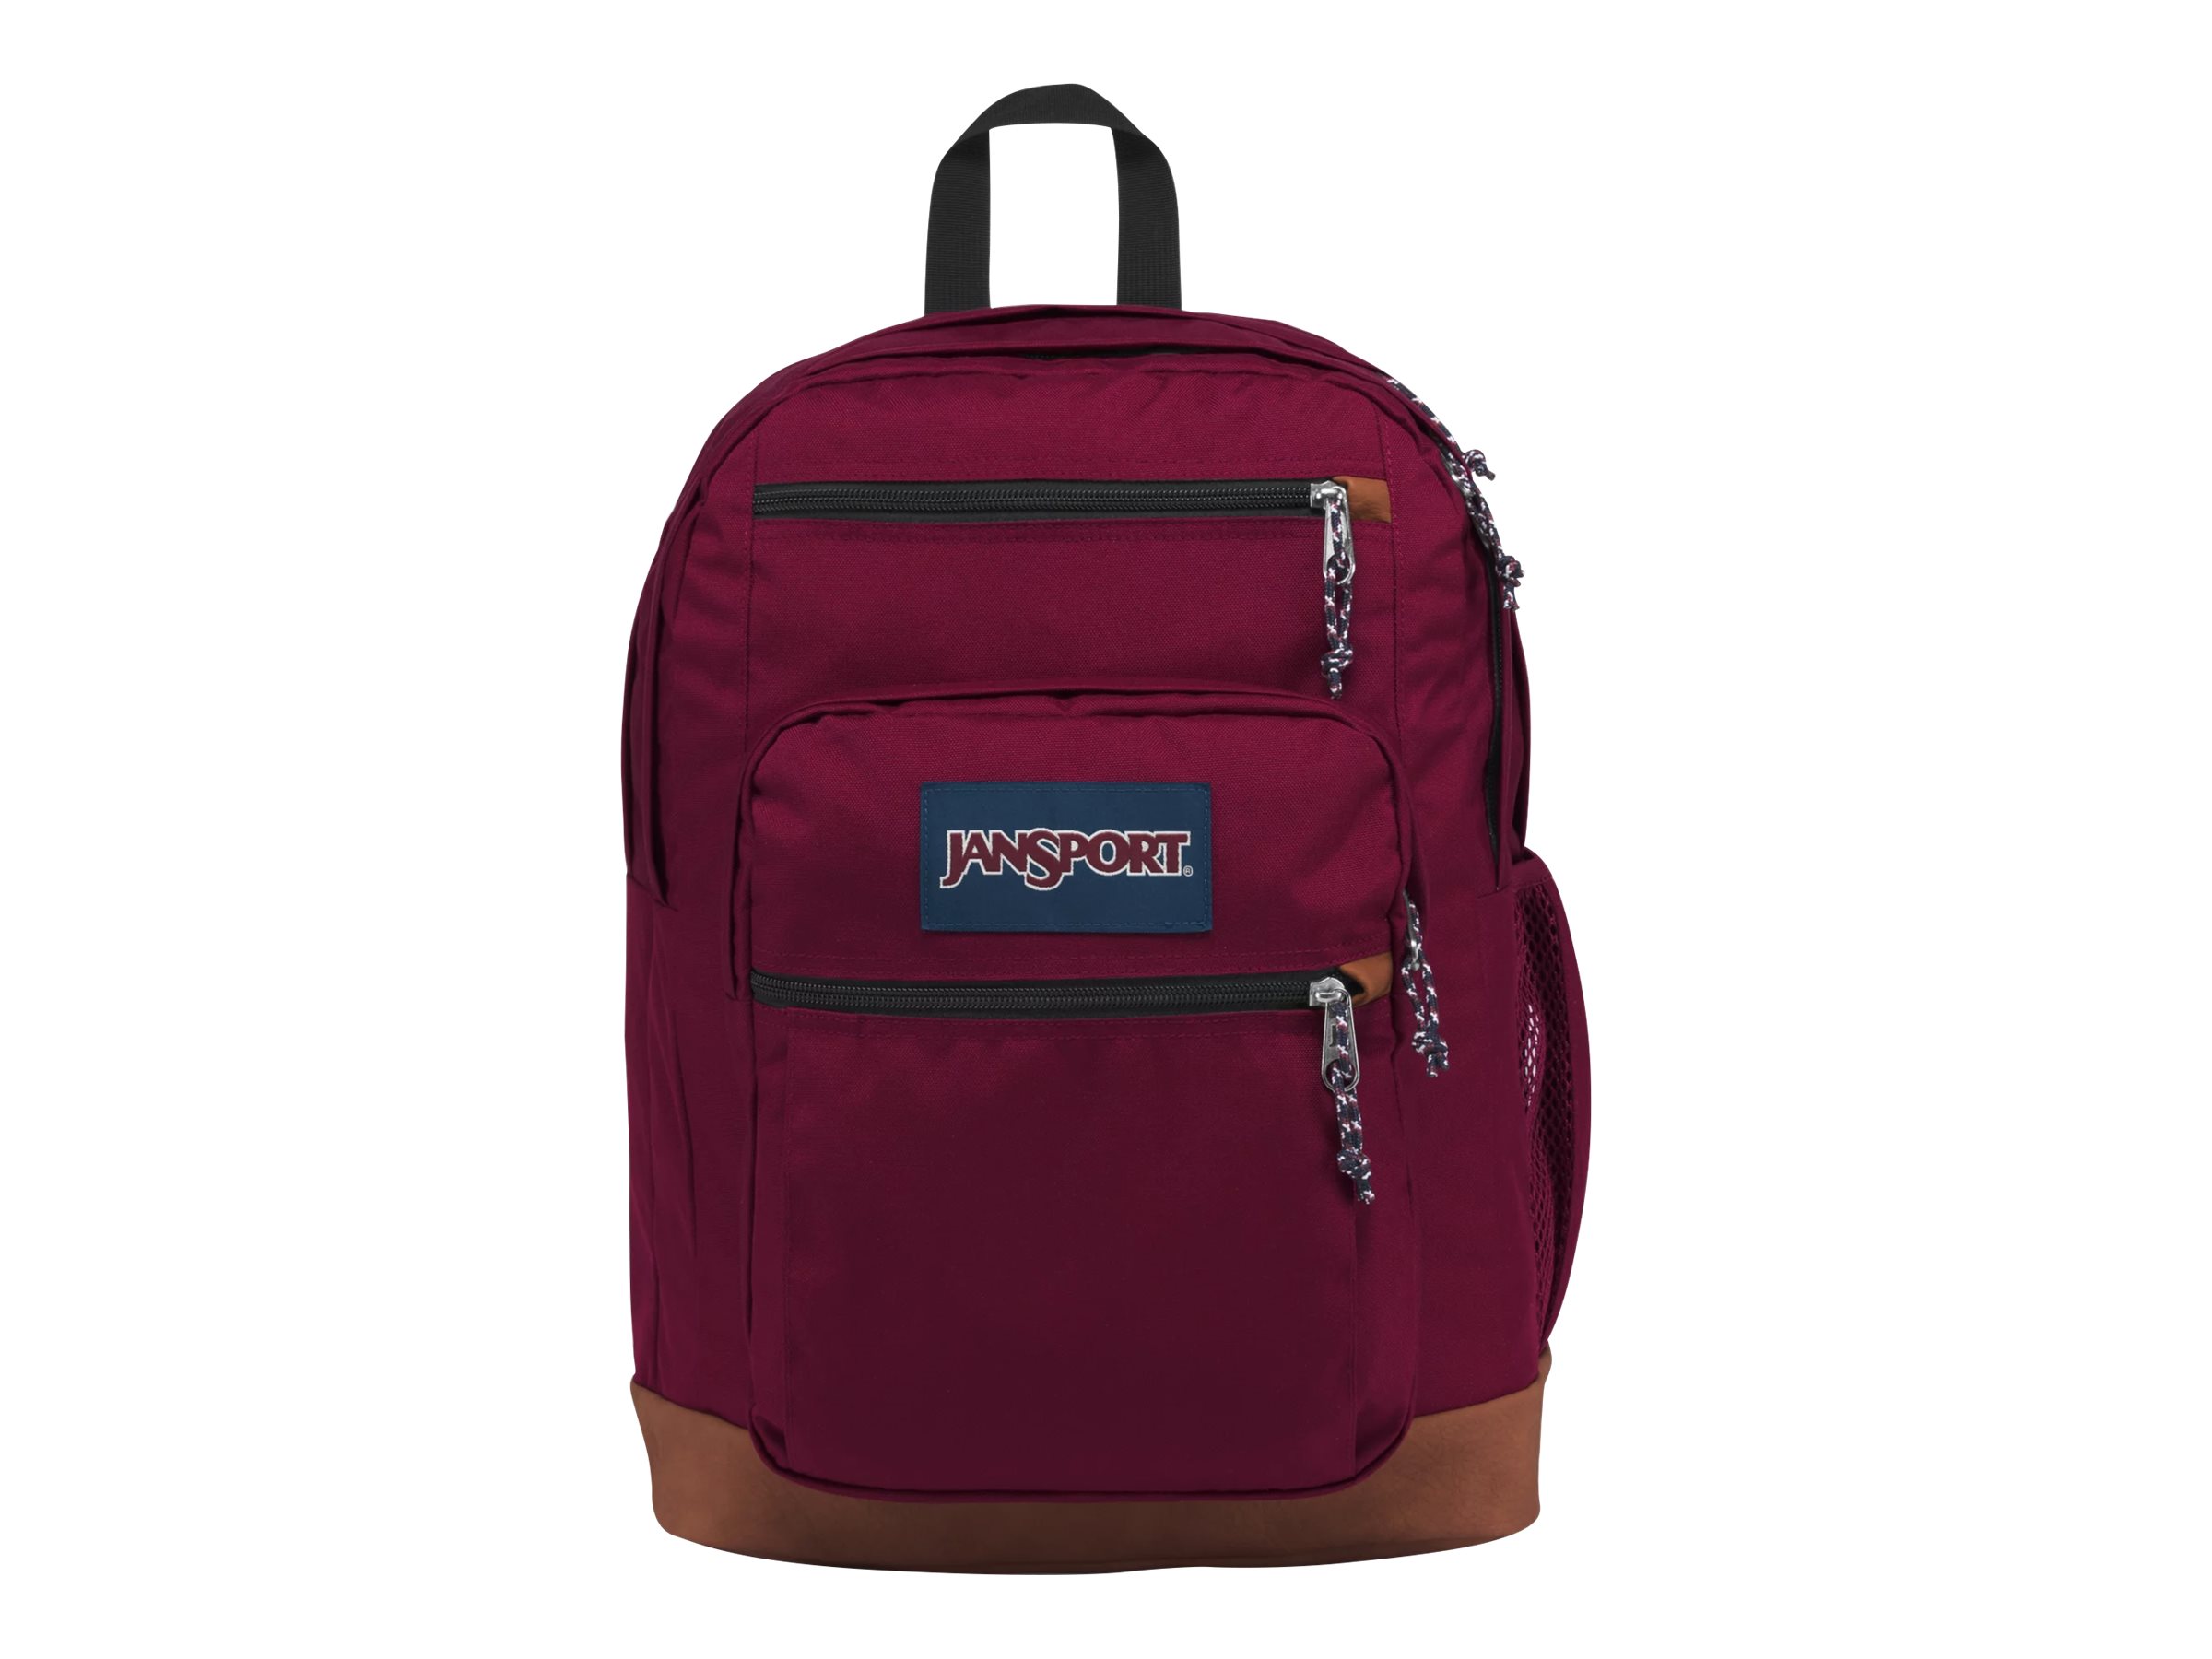 JanSport Cool Student - Notebook carrying backpack - 15" - russet red - image 4 of 4